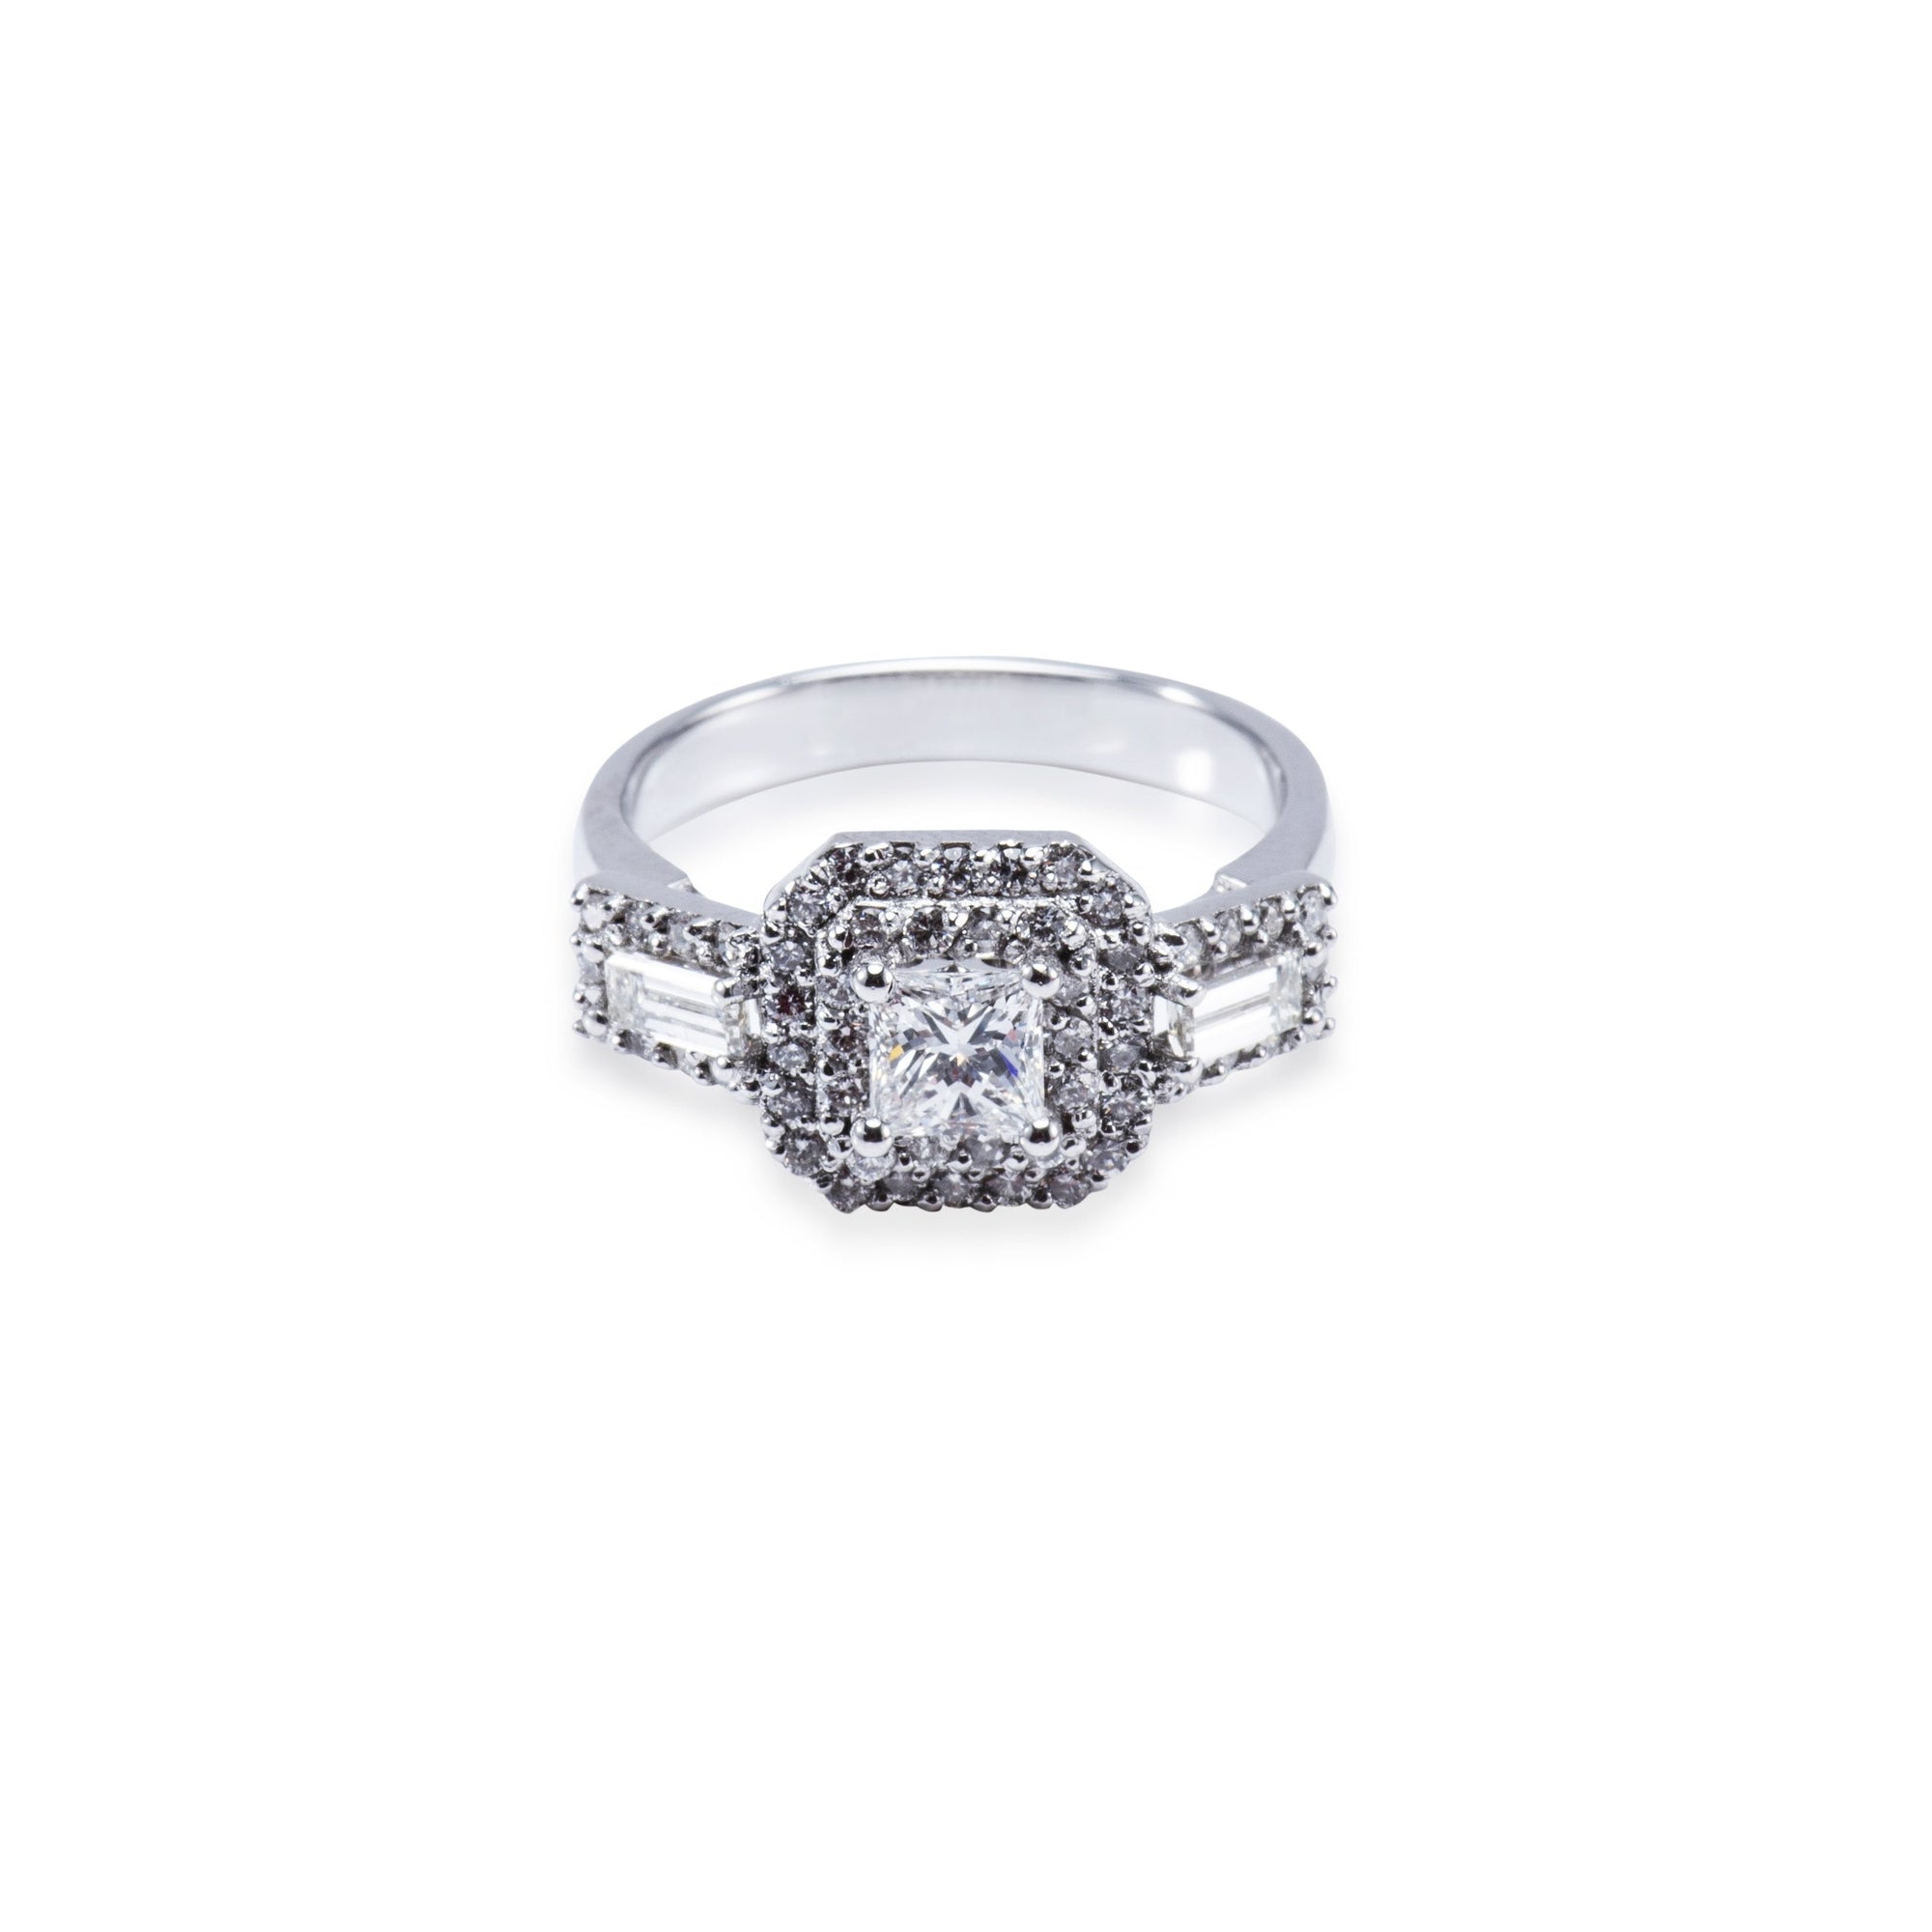 18CT White Gold Trio Halo Style Diamond Engagement Ring. Aces Jewellers 